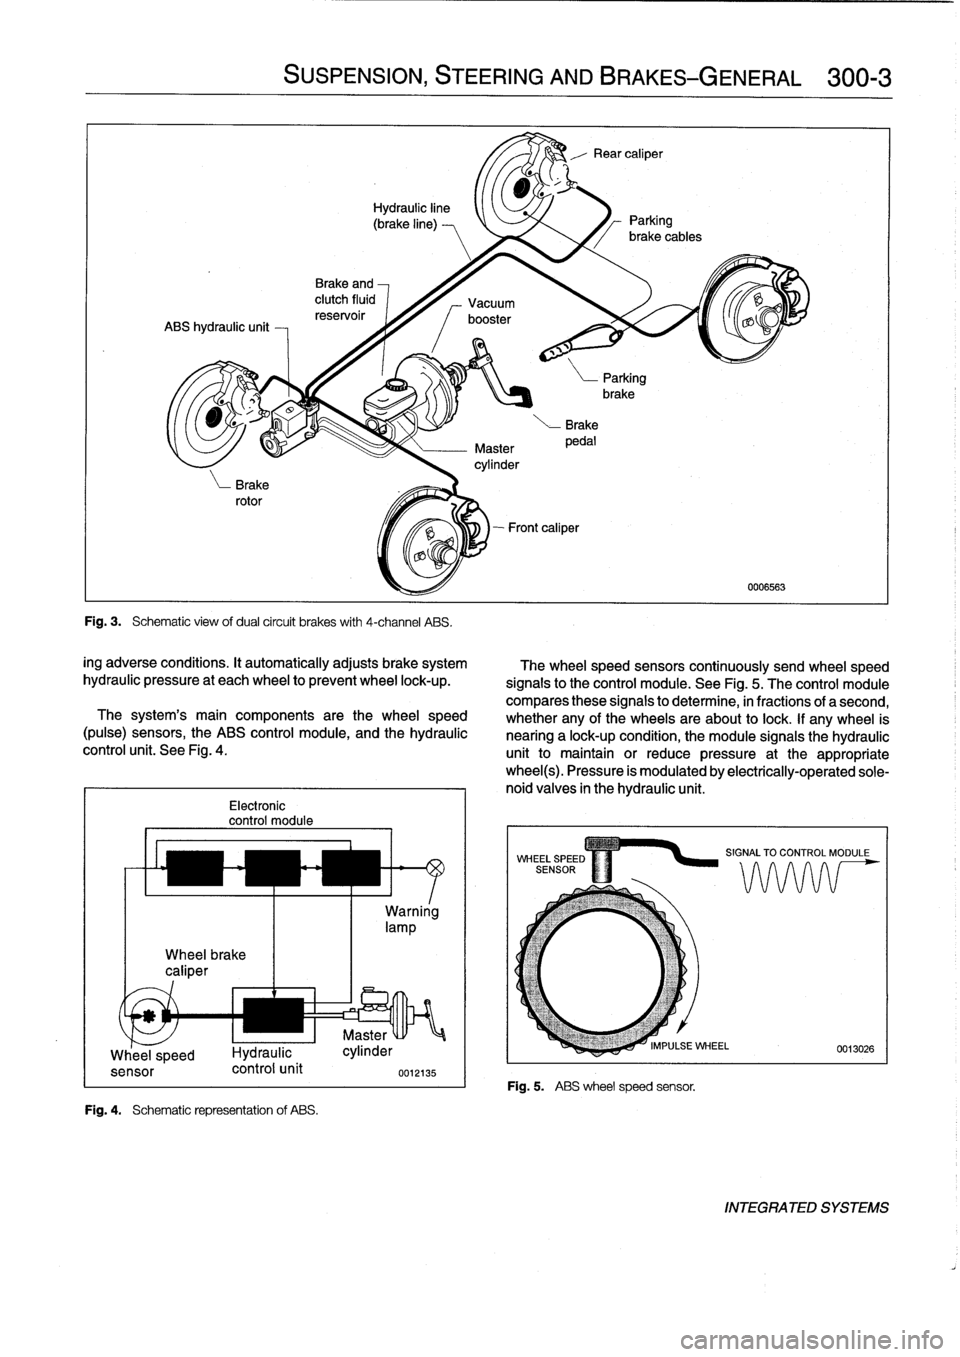 BMW 328i 1994 E36 User Guide 
Wheel
brake
caliper

Electronic
control
module
Fig
.
4
.

	

Schematic
representation
of
ABS
.

SUSPENSION,
STEERING
ANDBRAKES-GENERAL

	

300-3

Fig
.
3
.

	

Schematic
view
ofdual
circuit
brakes
wi